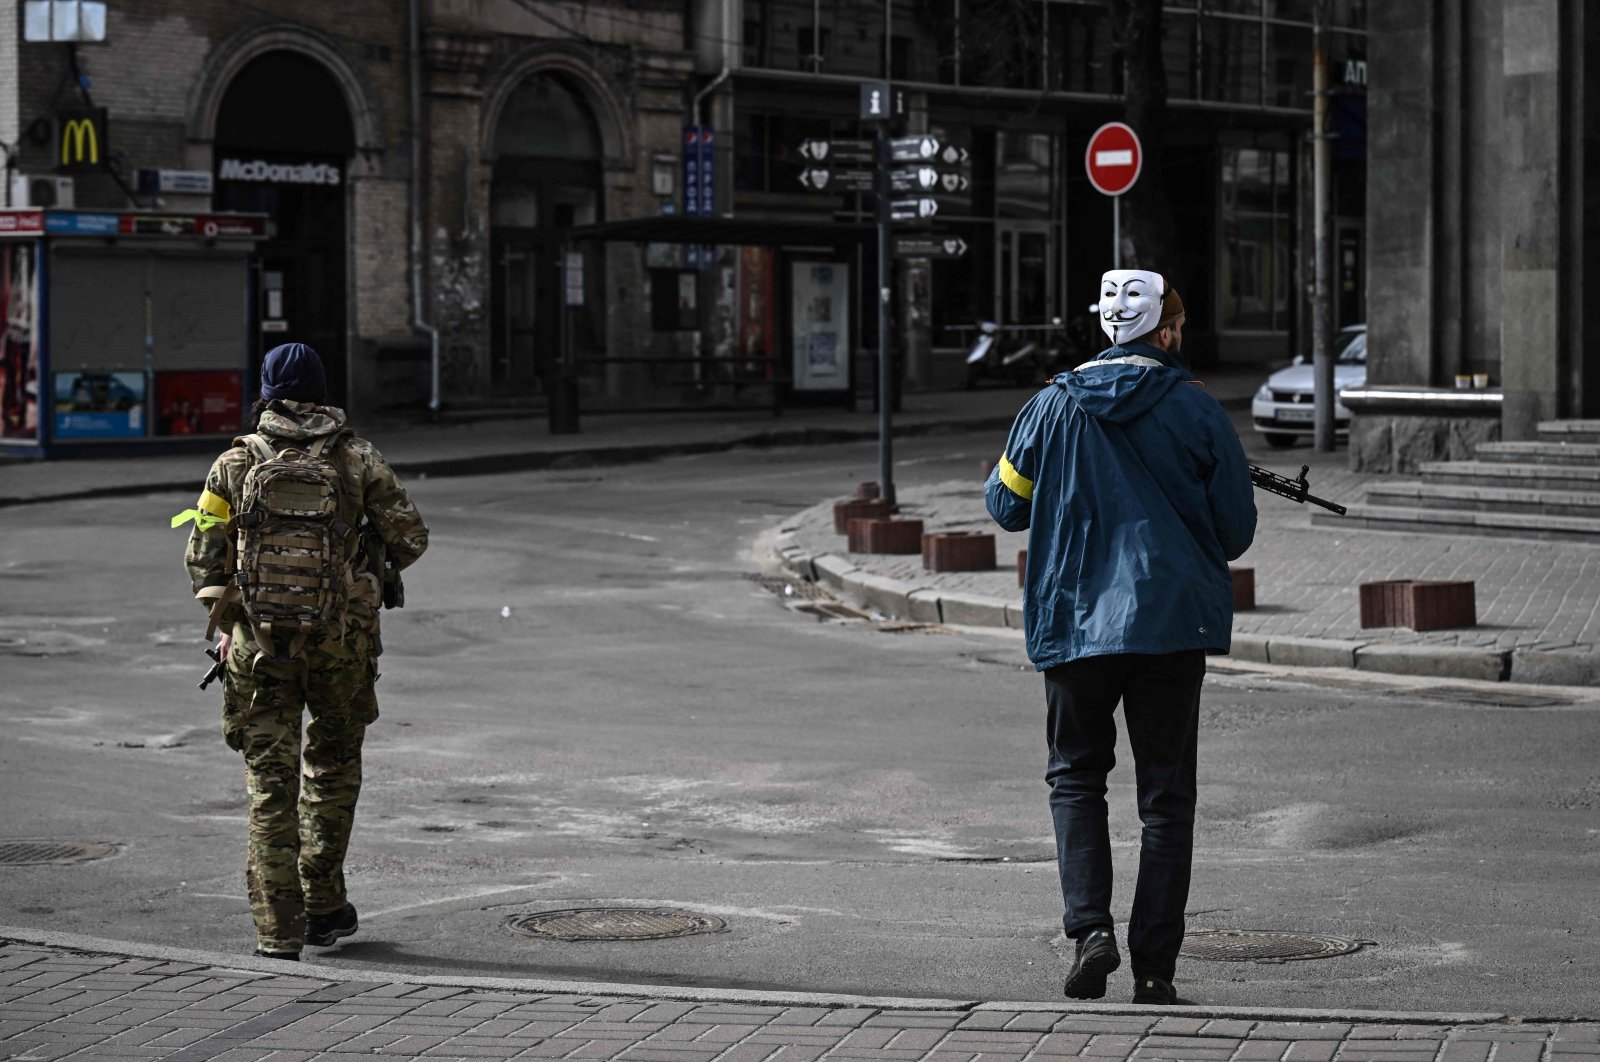 A member of Ukrainian forces, wearing Guy Fawkes mask (Anonymous mask), patrols downtown Kyiv, on Feb. 27, 2022. (Photo by Aris Messinis / AFP)